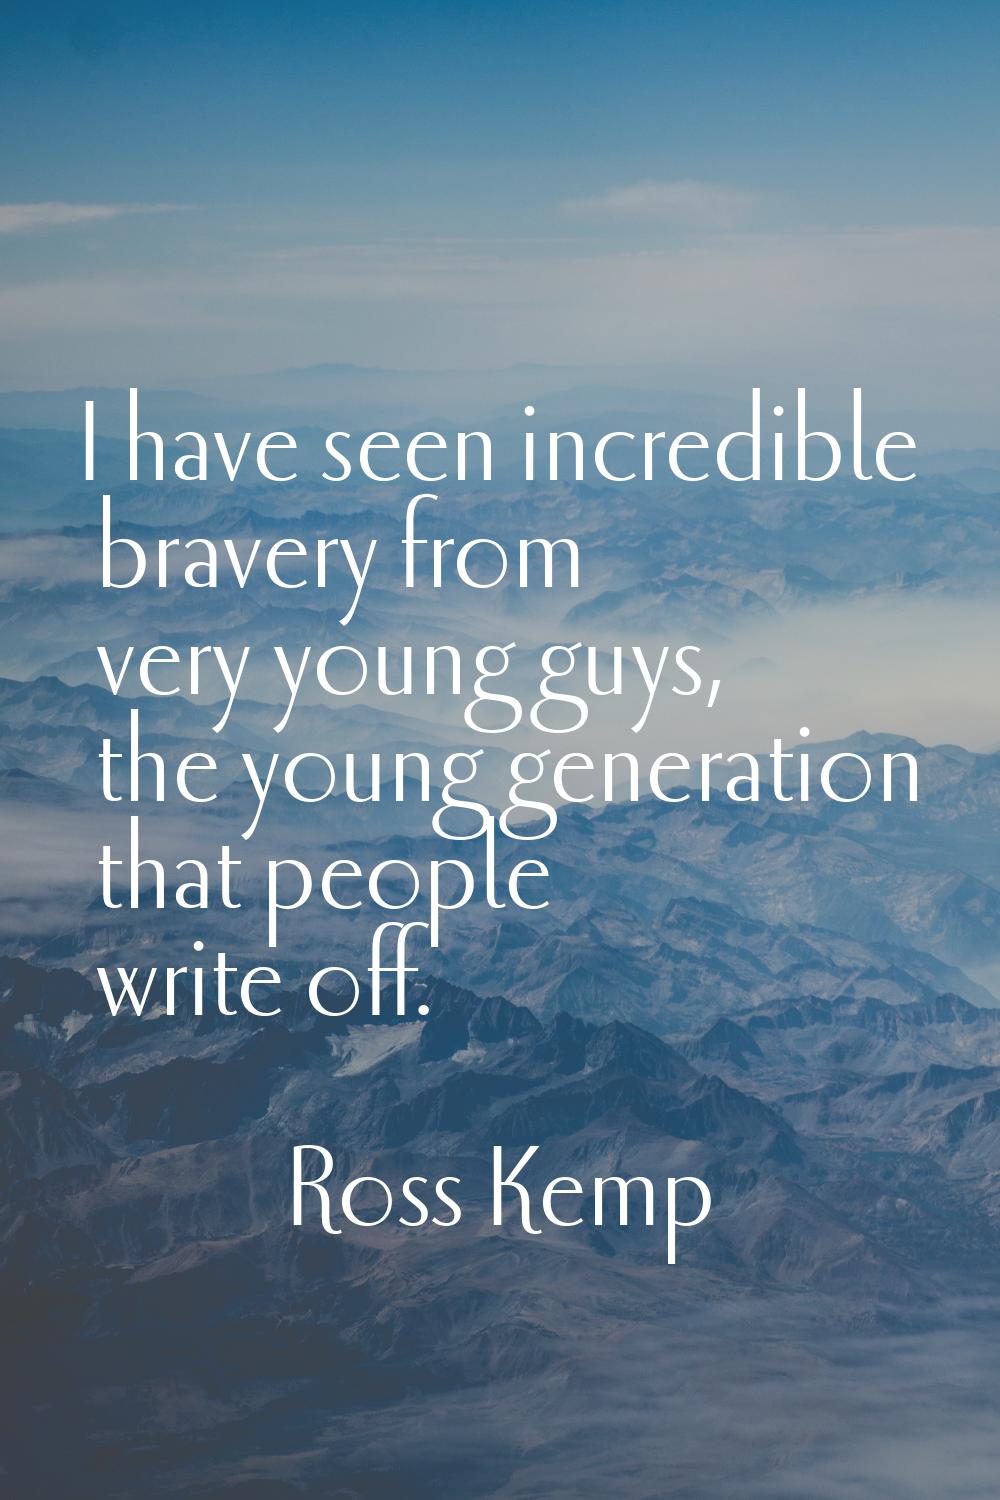 I have seen incredible bravery from very young guys, the young generation that people write off.